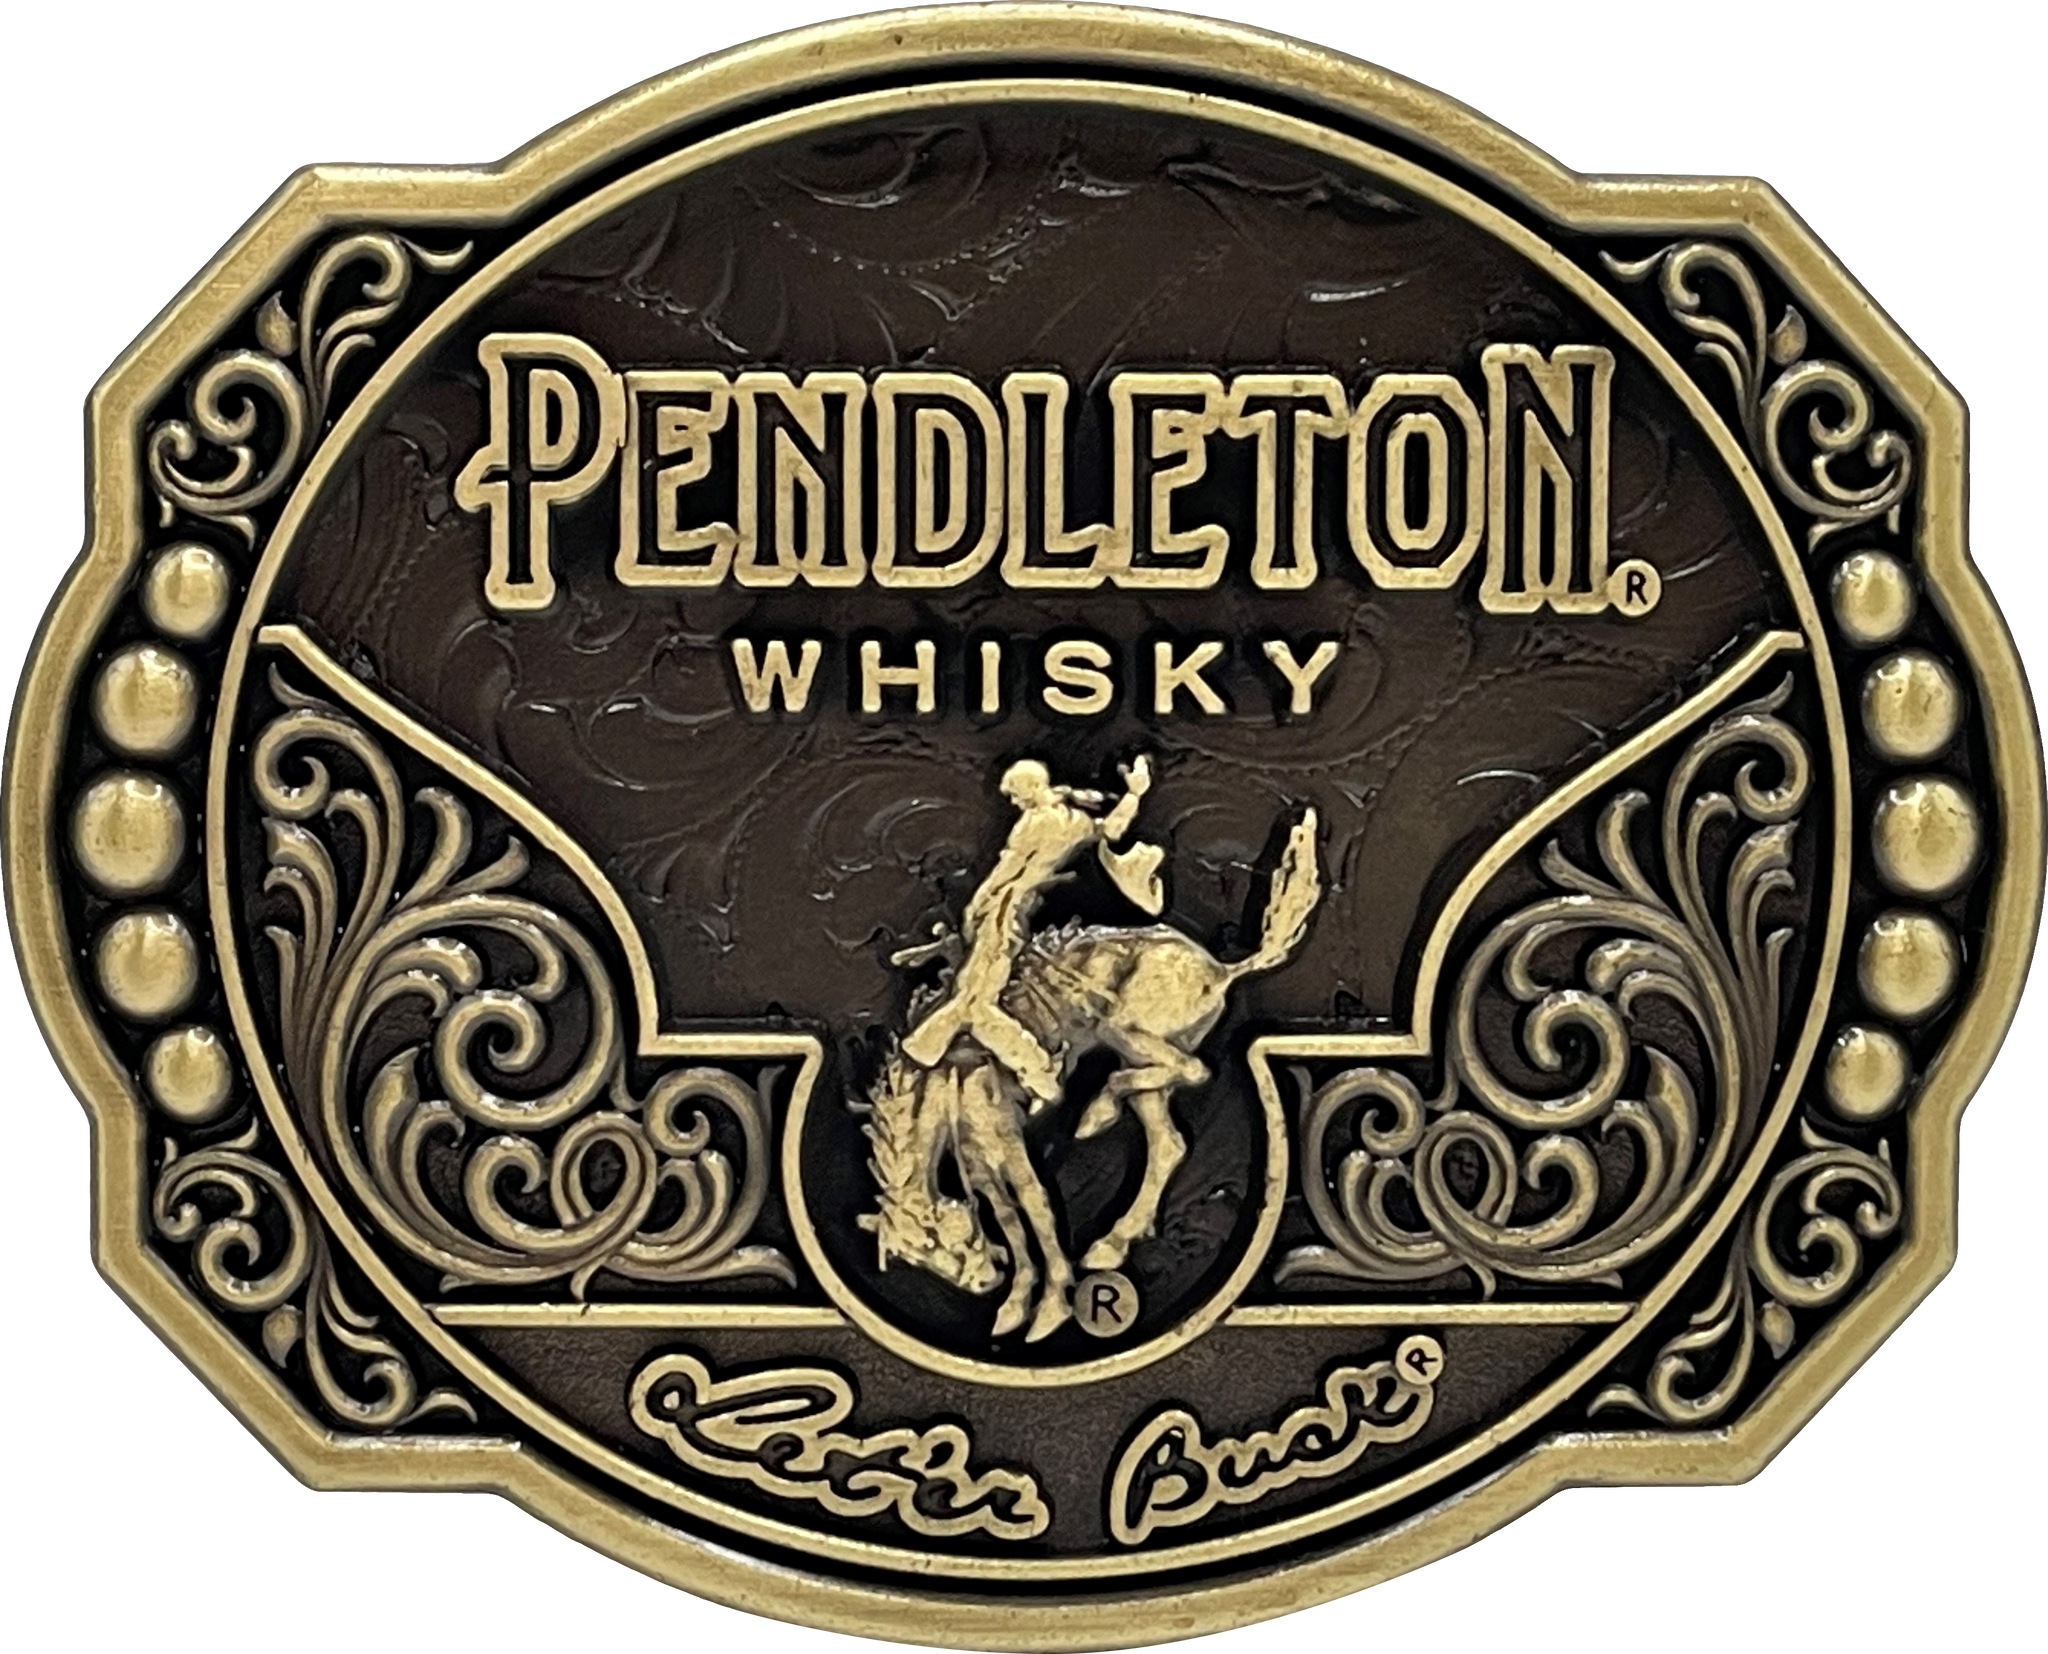 Pendleton Whisky 2024 Belt Buckle - Featuring Pendleton Round-Ups Bucking Horse and Leter Buck Slogan on Brown Leather with Gold Detail - Commemorating 2024